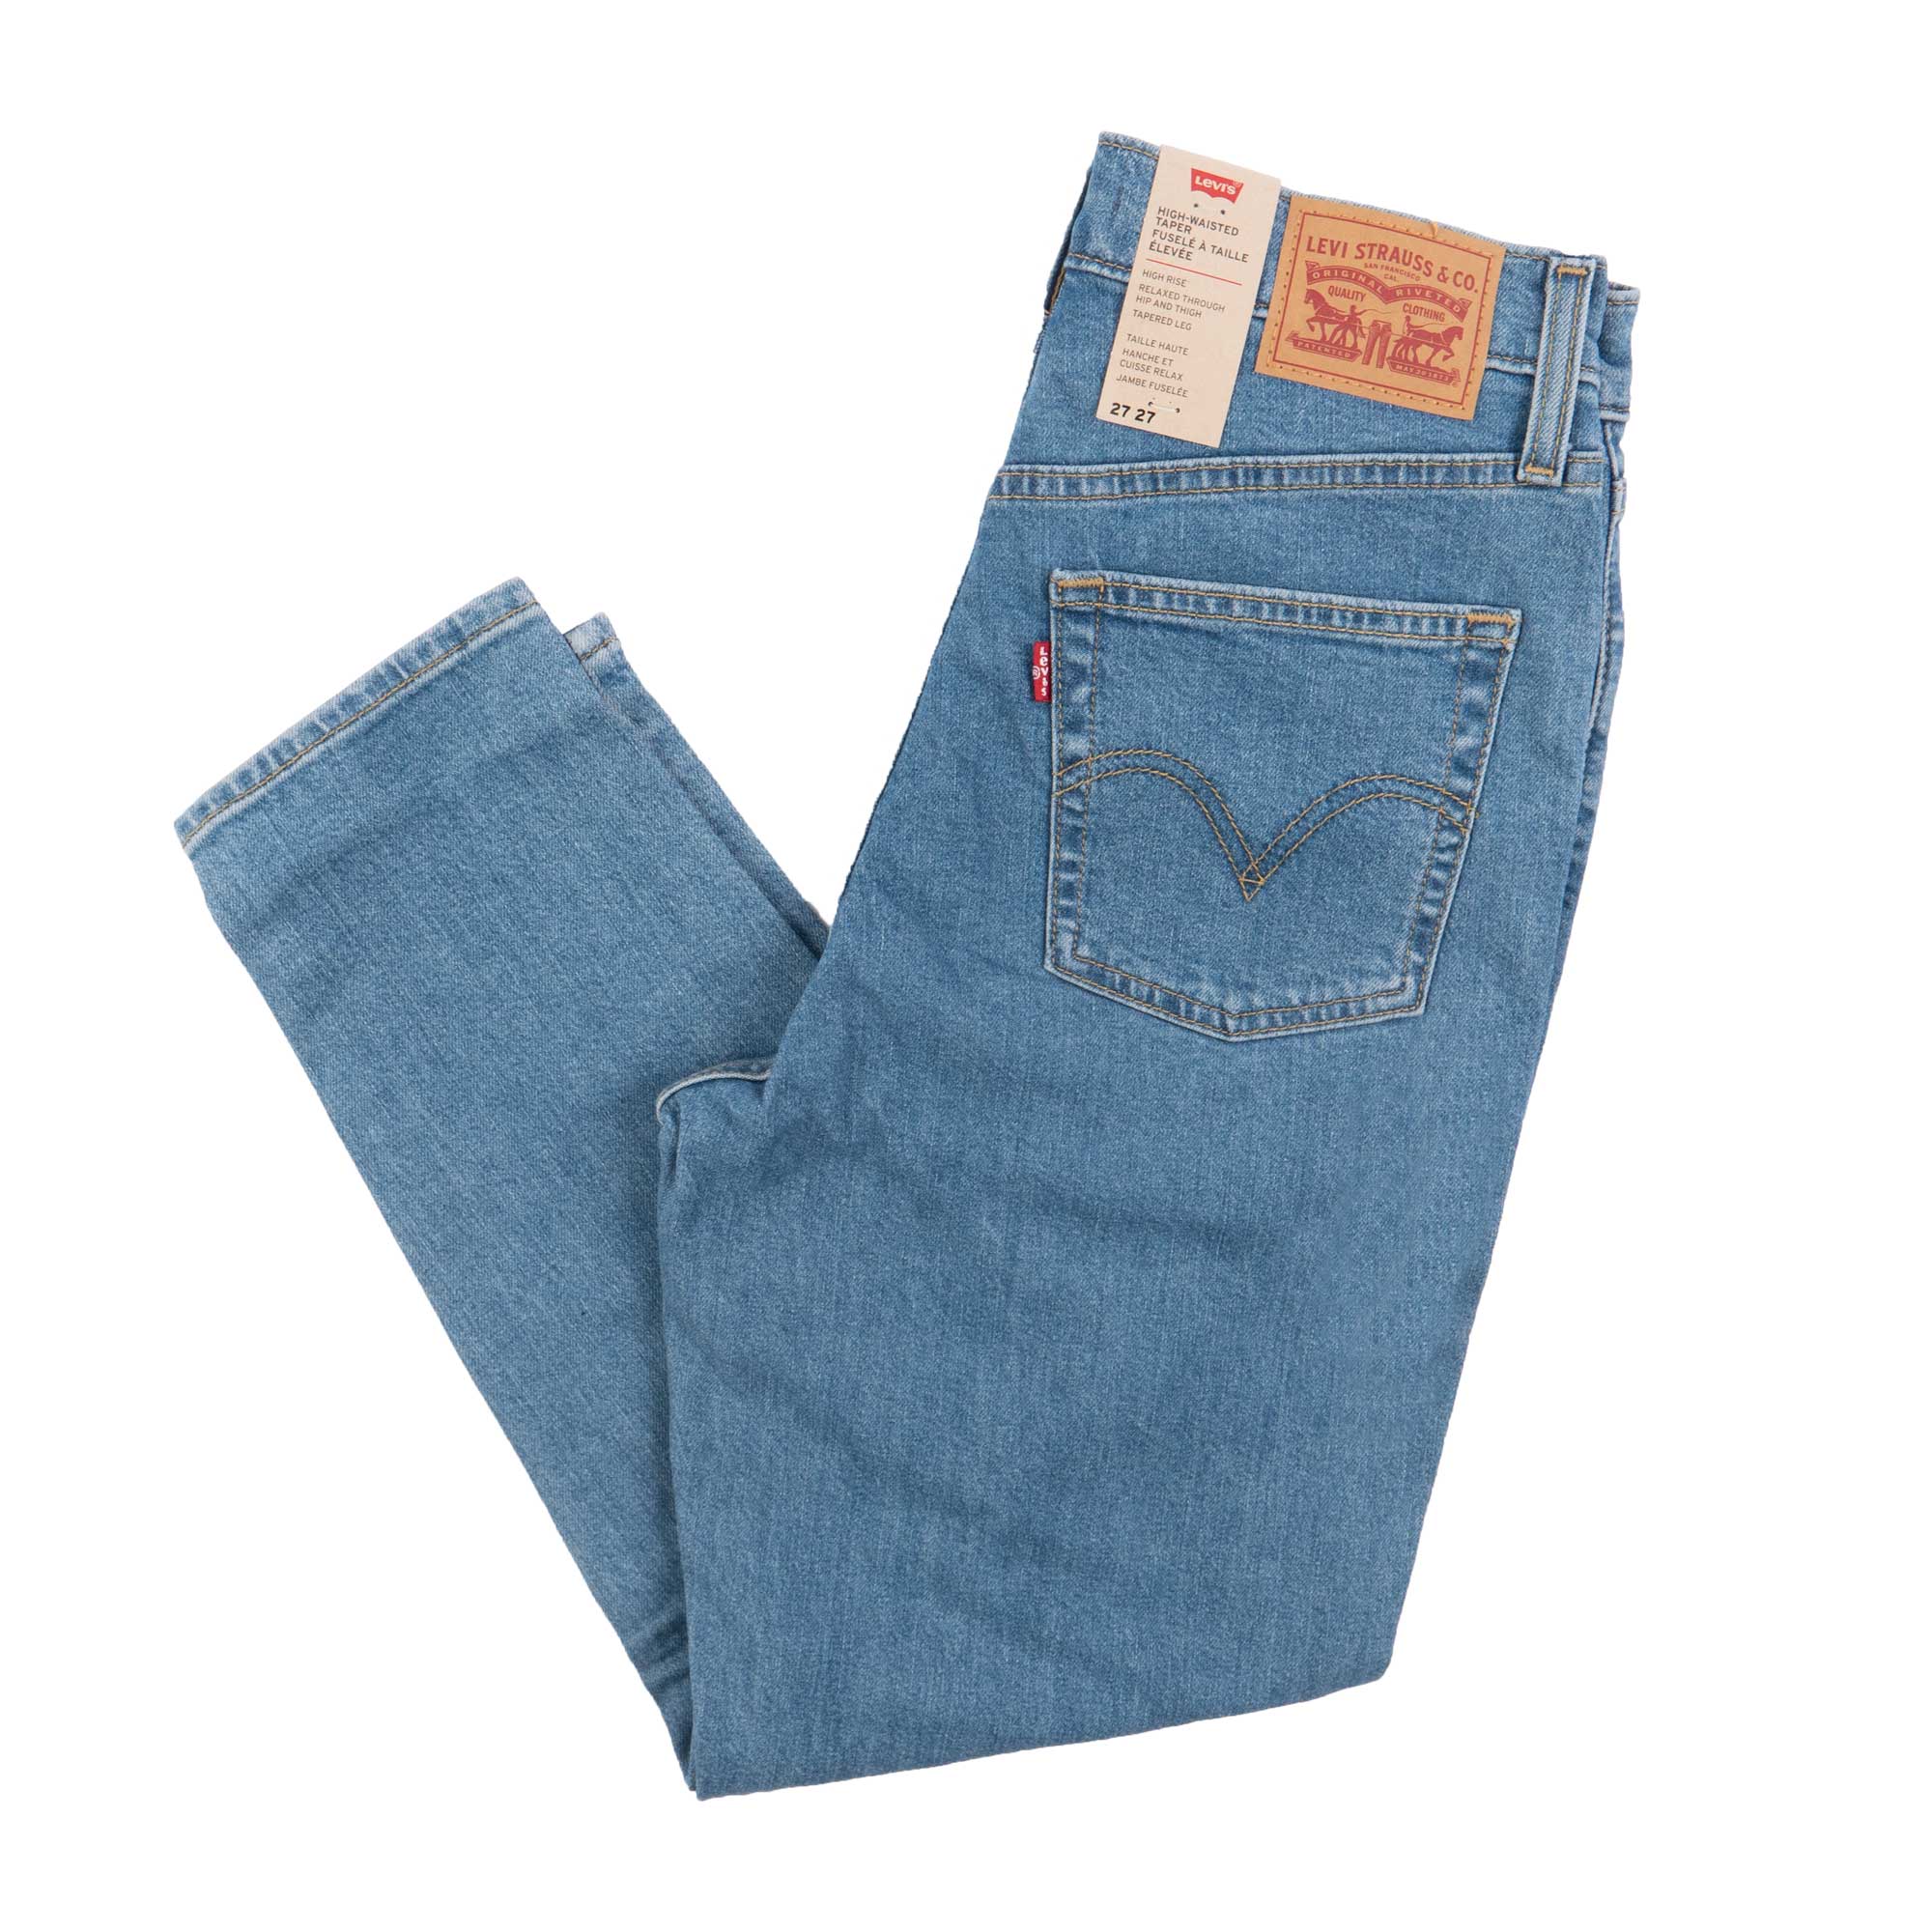 High Waisted Mom Jeans Levis Relaxed Fit Tapered Leg Medium Fade, Vintage  Clothing -  Canada